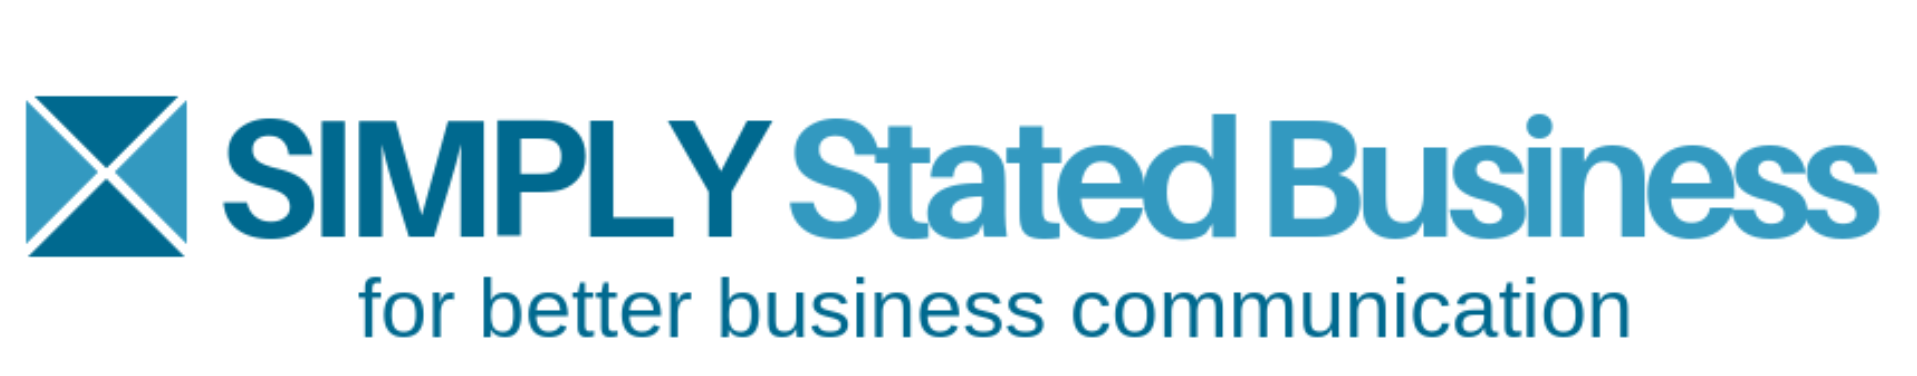 Simply Stated Business logo